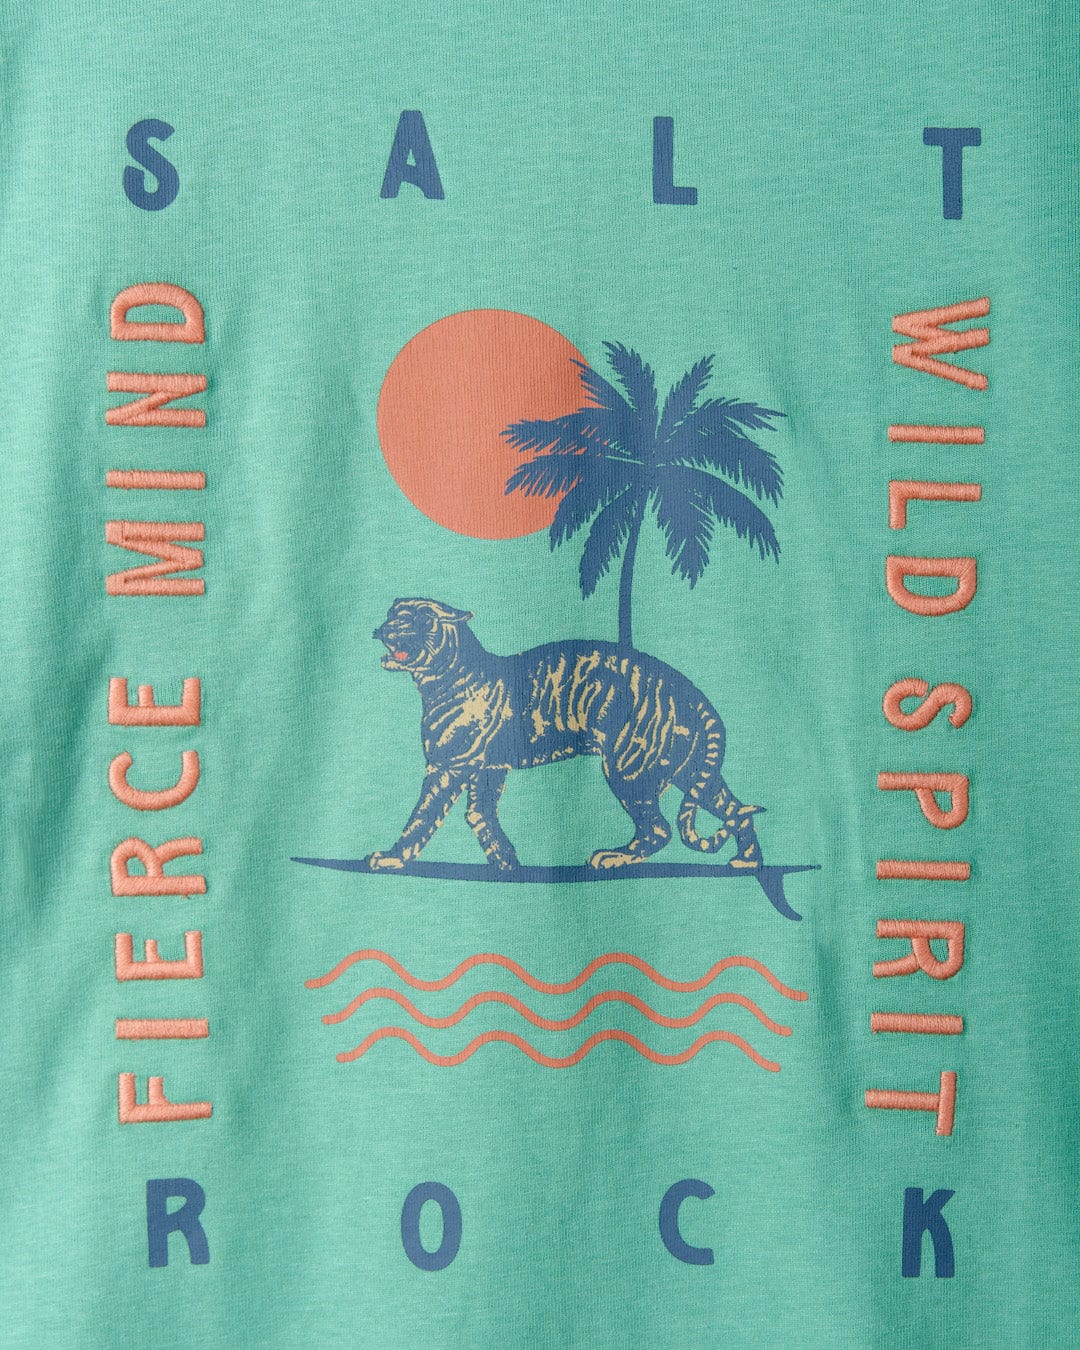 Saltrock Fierce Mind - Womens Boxy T-Shirt - Green design featuring the phrases "Saltrock fierce mind wild spirit", an illustration of a tiger on a surfboard, palm trees, an orange sun, and ocean waves on a teal background.